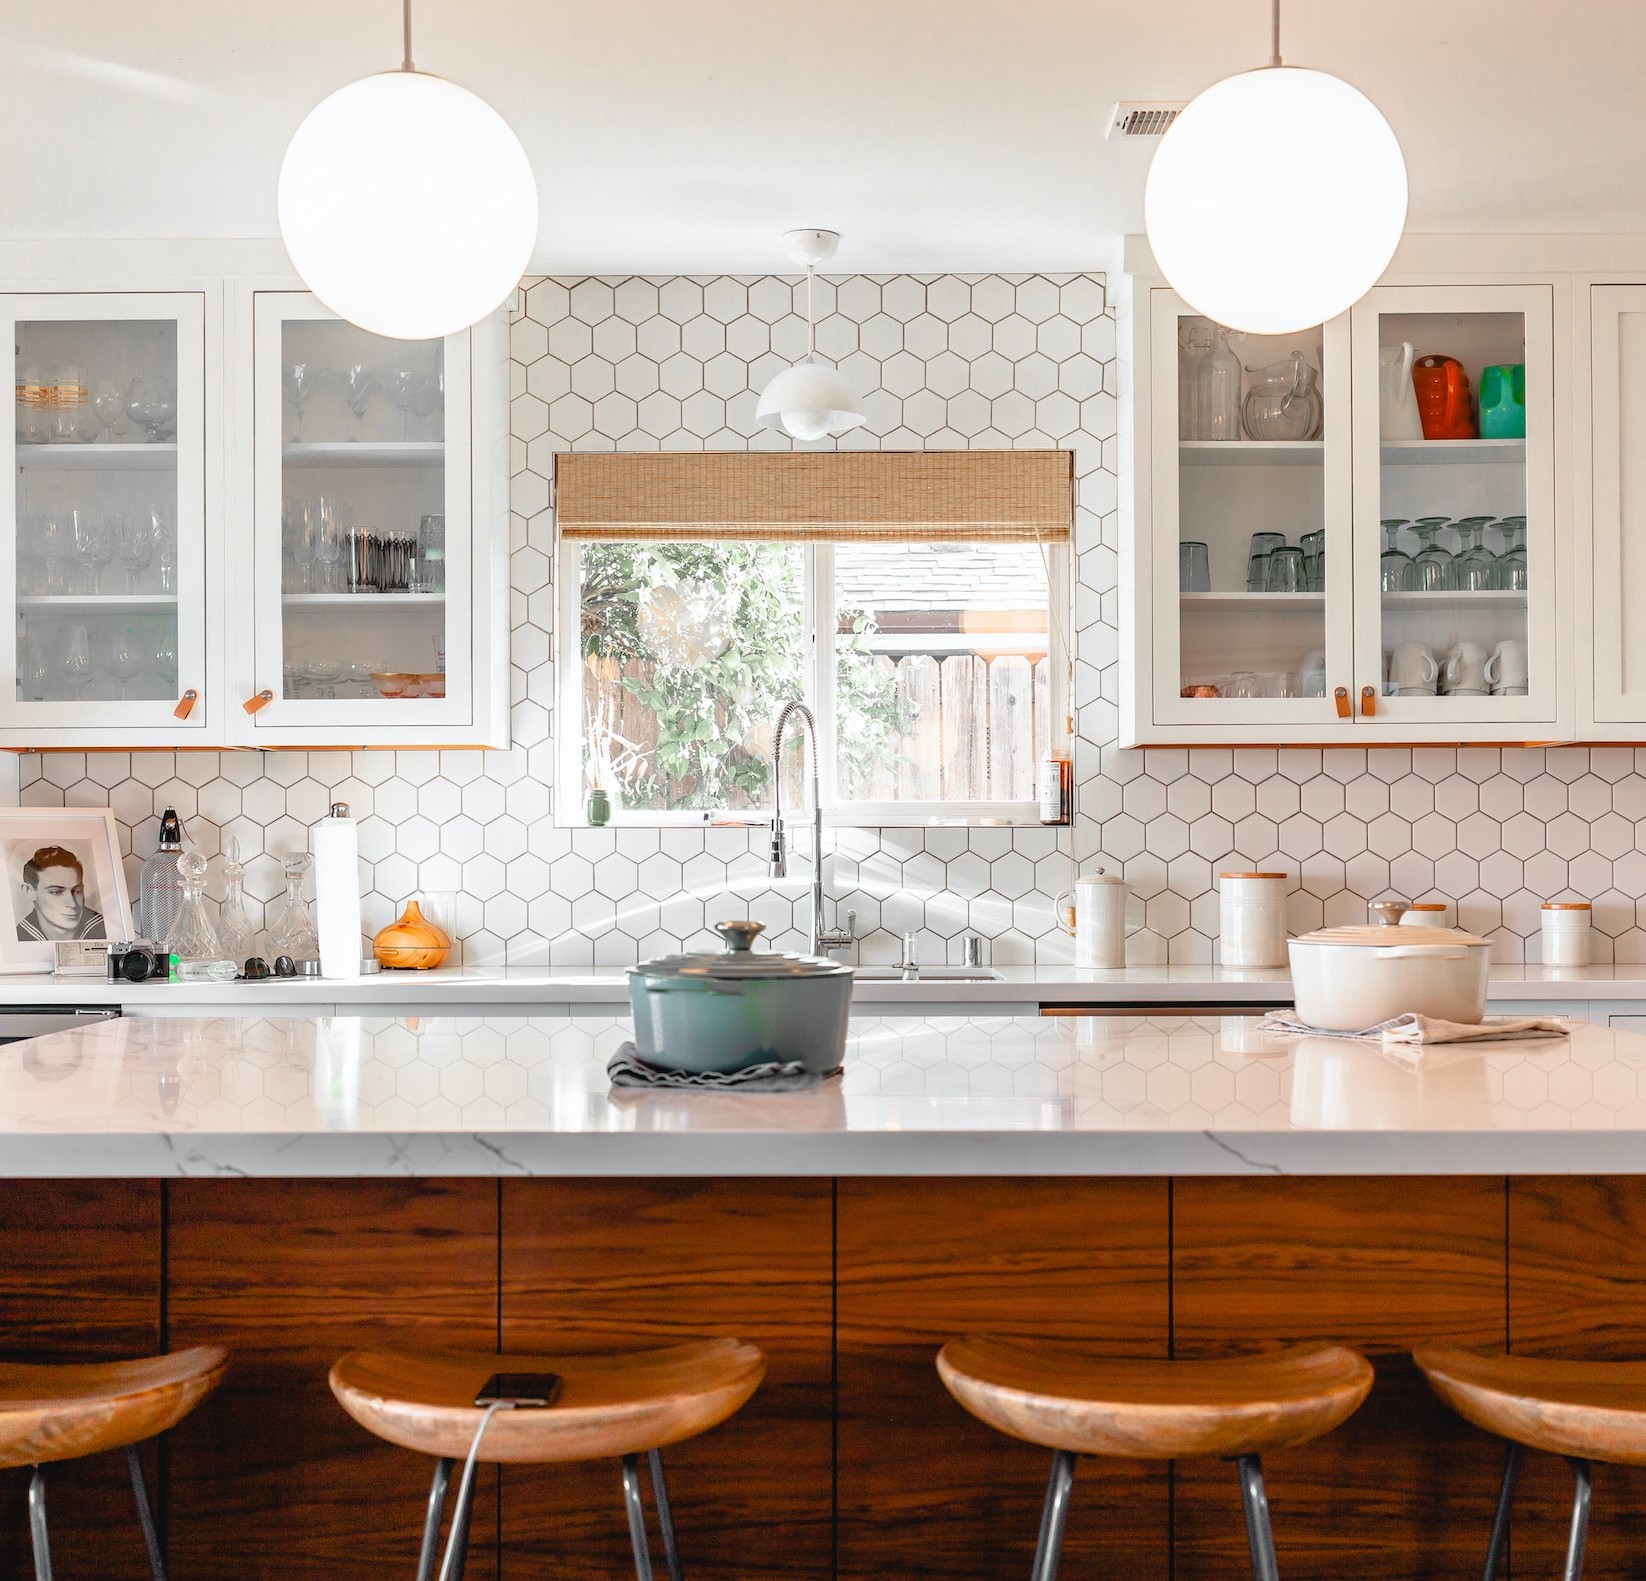 Bright White Kitchen With Island And White Hexagonal Tiling Aloing Wall With A Window Over The Sink